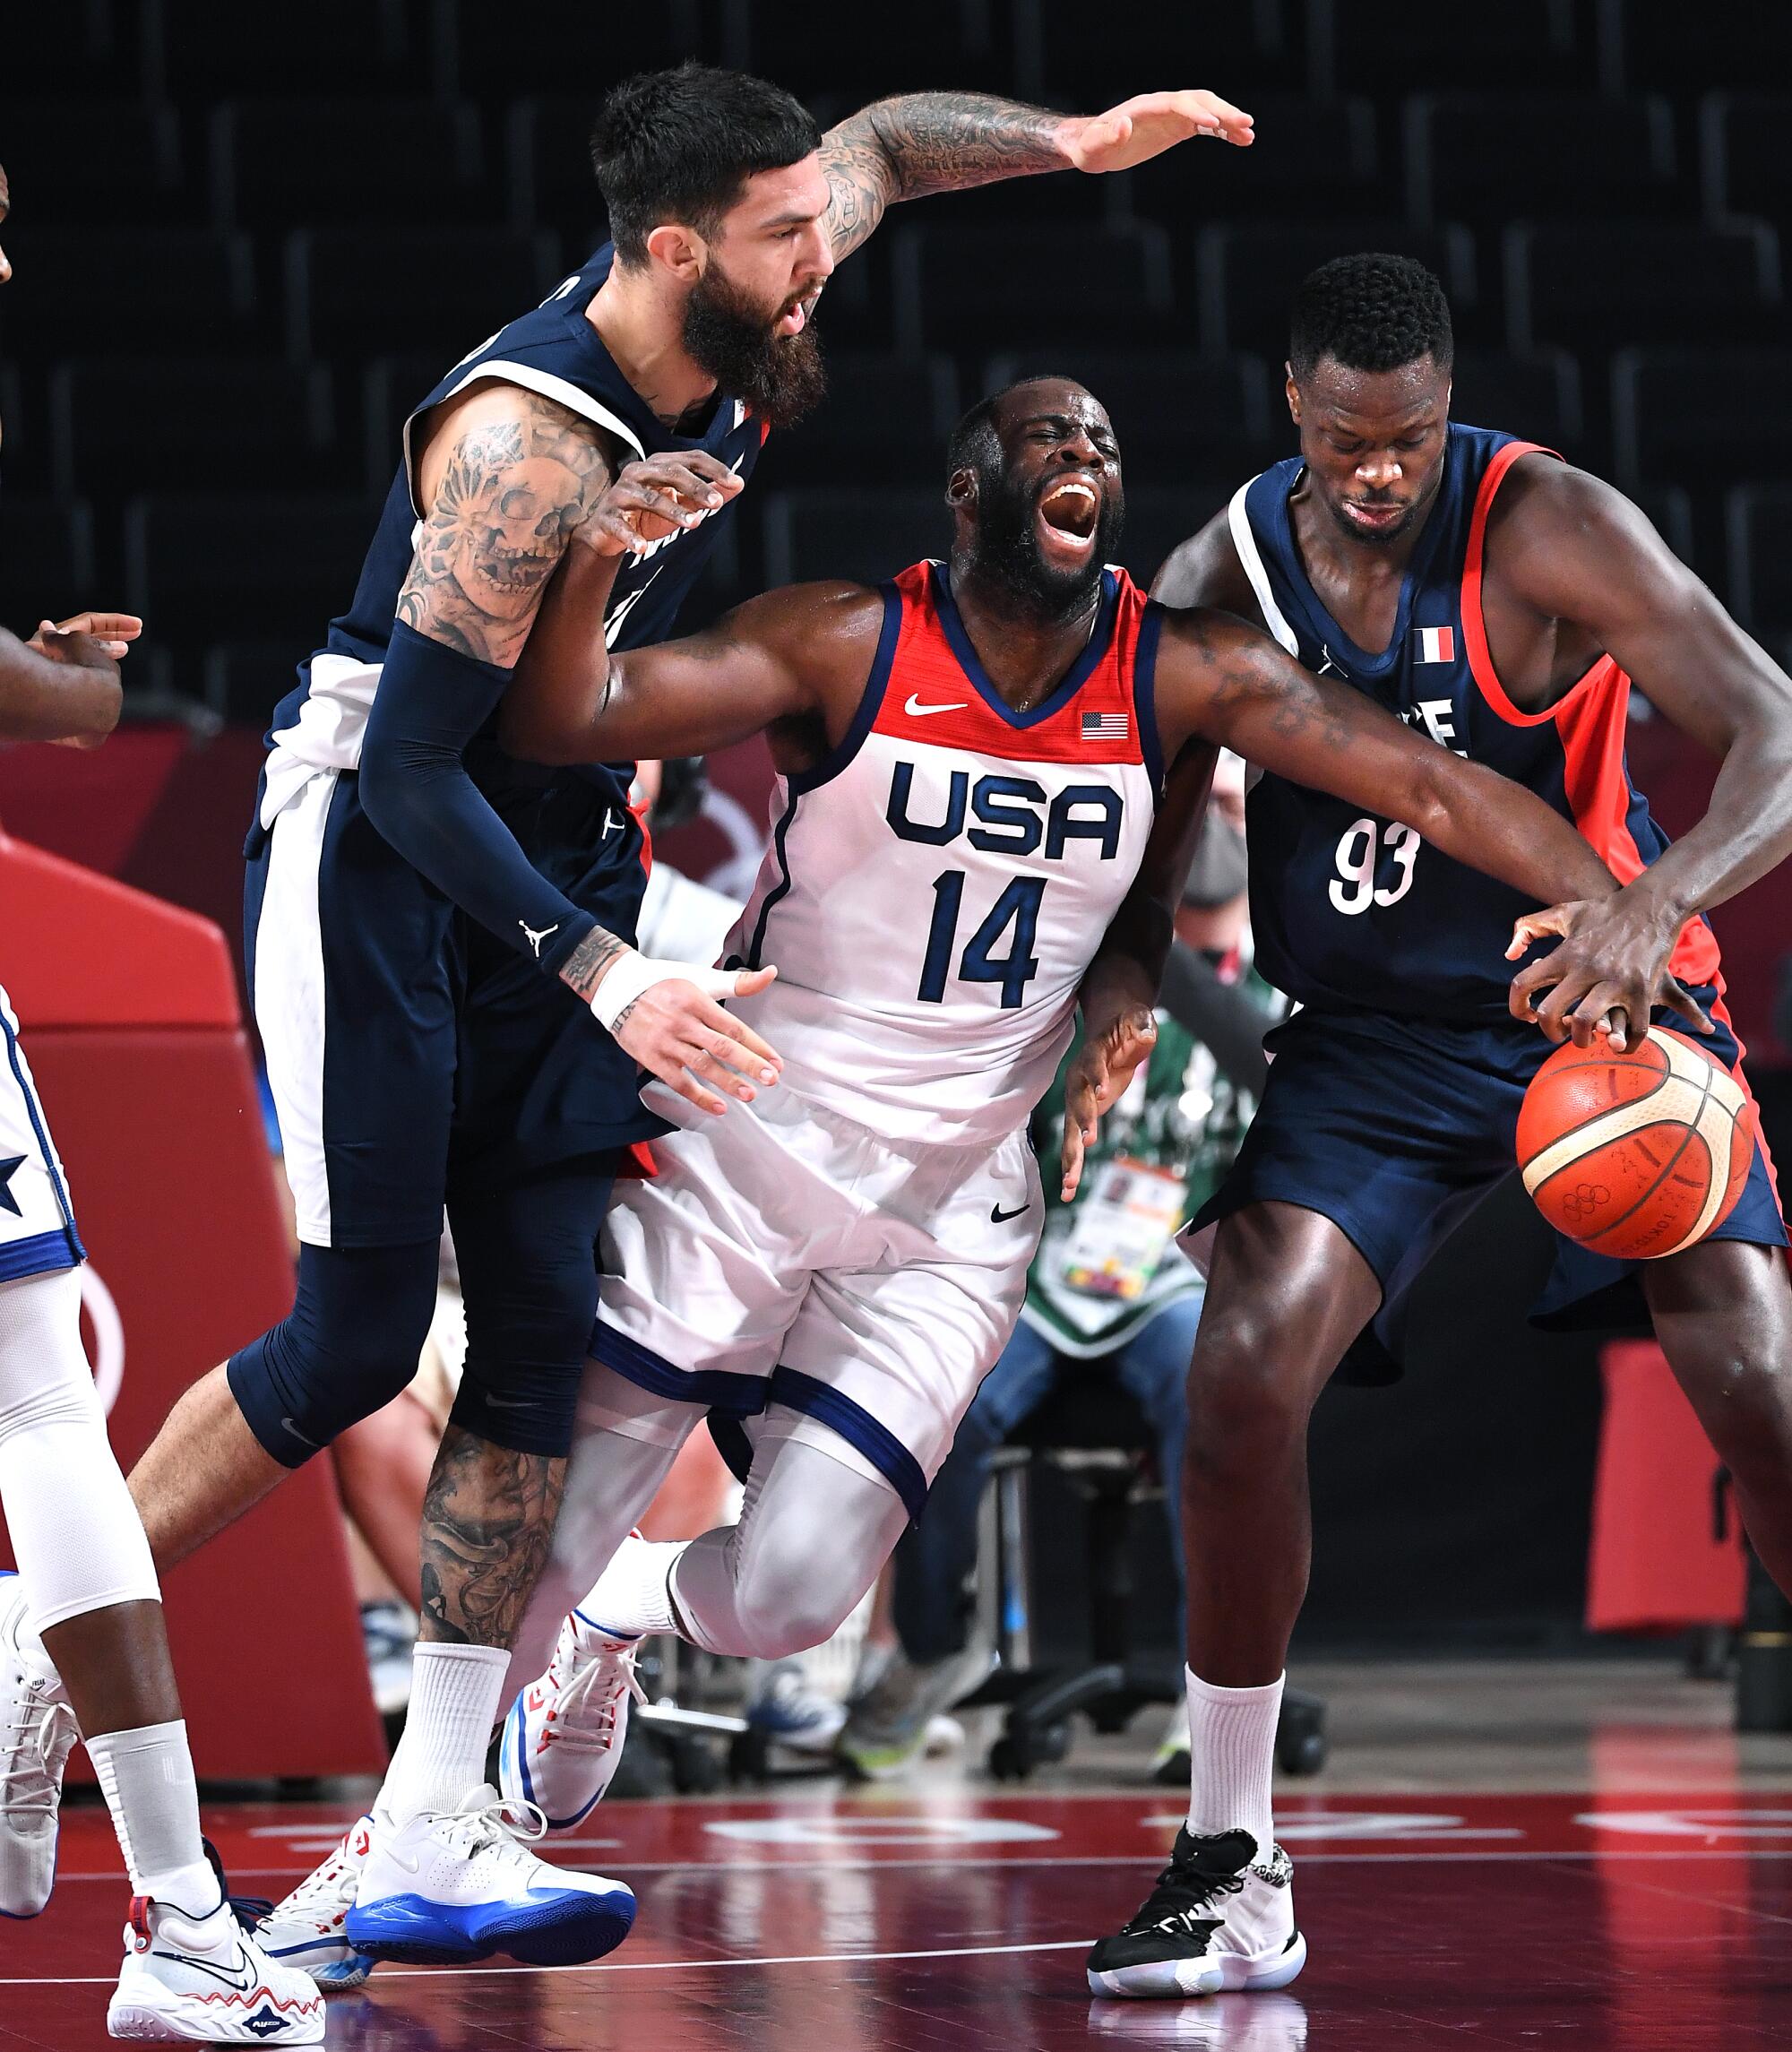  USA's Draymond Green is fouled by France's Vincent Poirier.